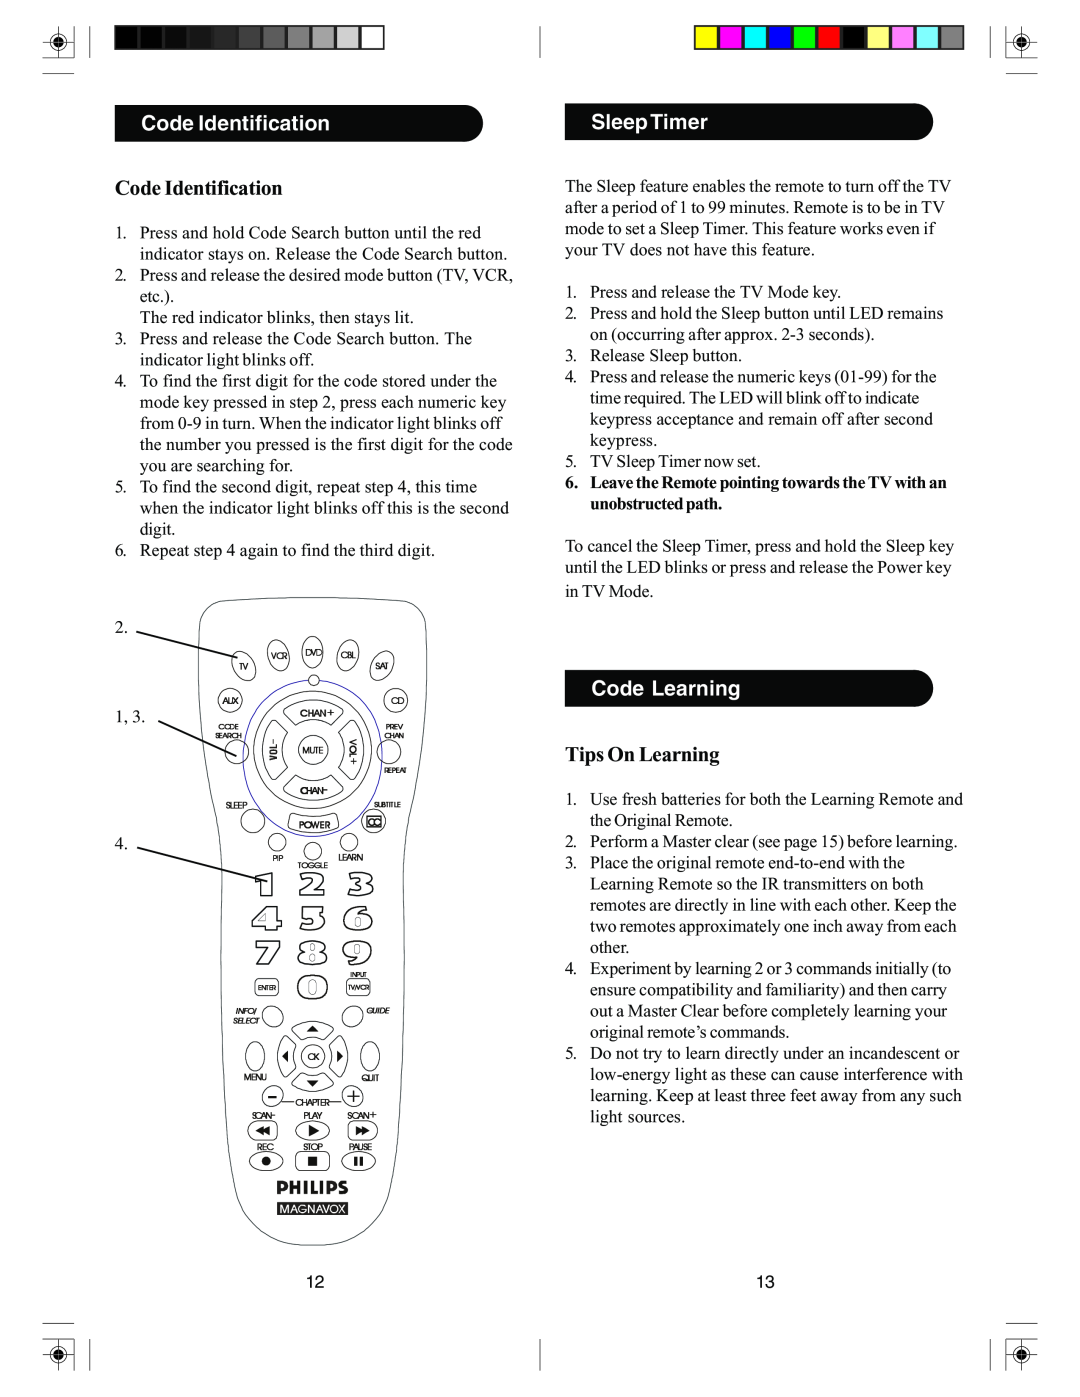 PYLE Audio PM725 manual Code Identification, Sleep Timer, Code Learning, Tips On Learning 